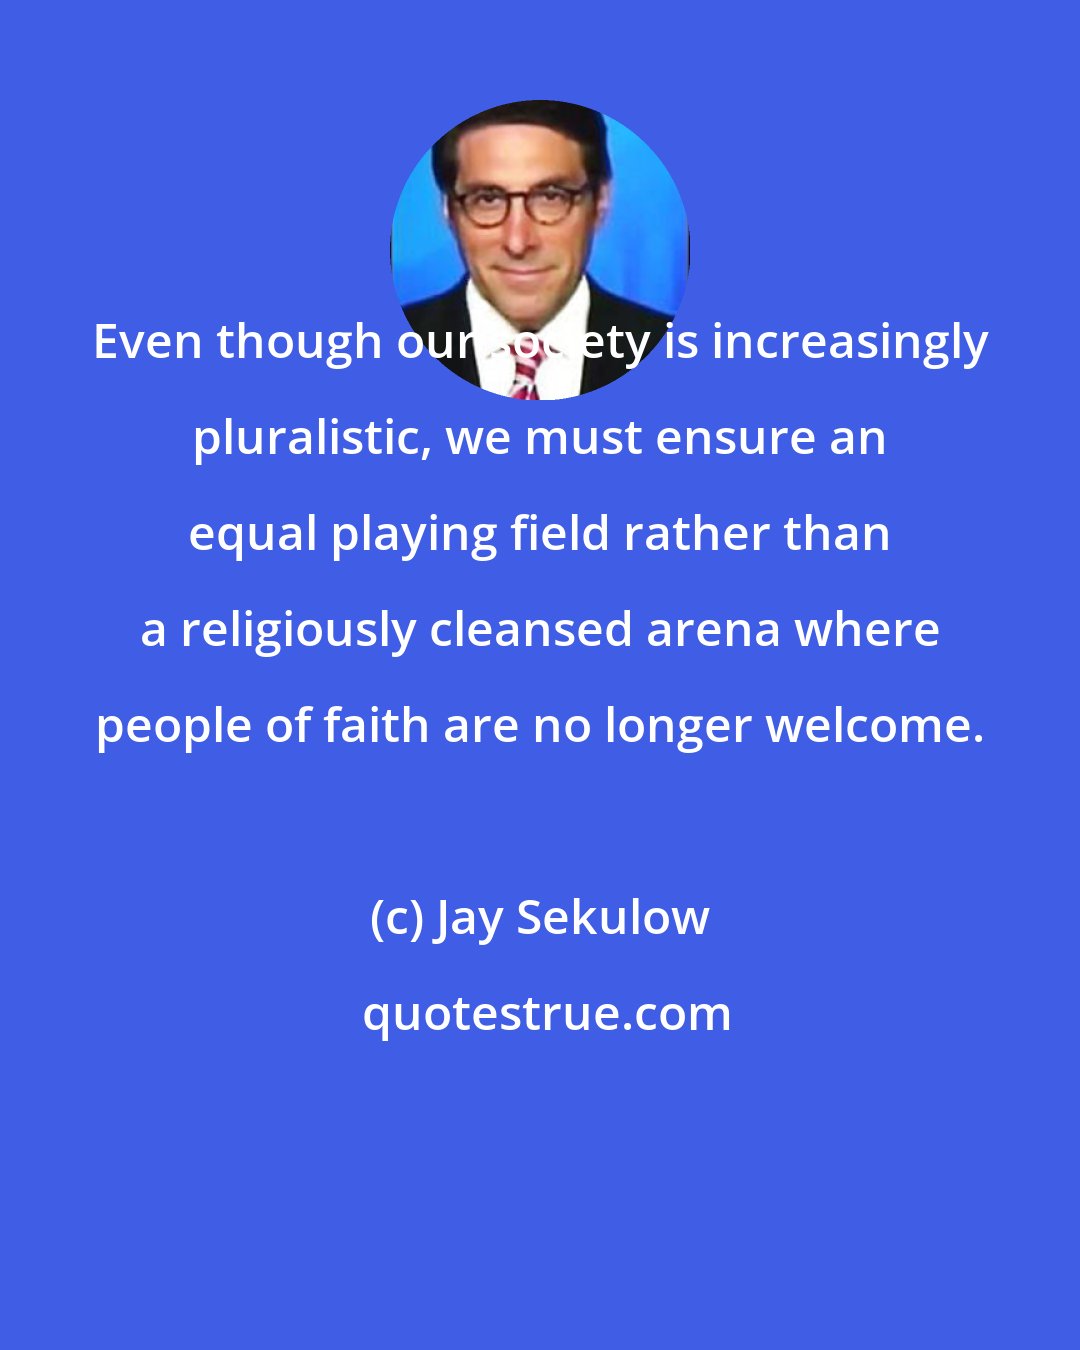 Jay Sekulow: Even though our society is increasingly pluralistic, we must ensure an equal playing field rather than a religiously cleansed arena where people of faith are no longer welcome.